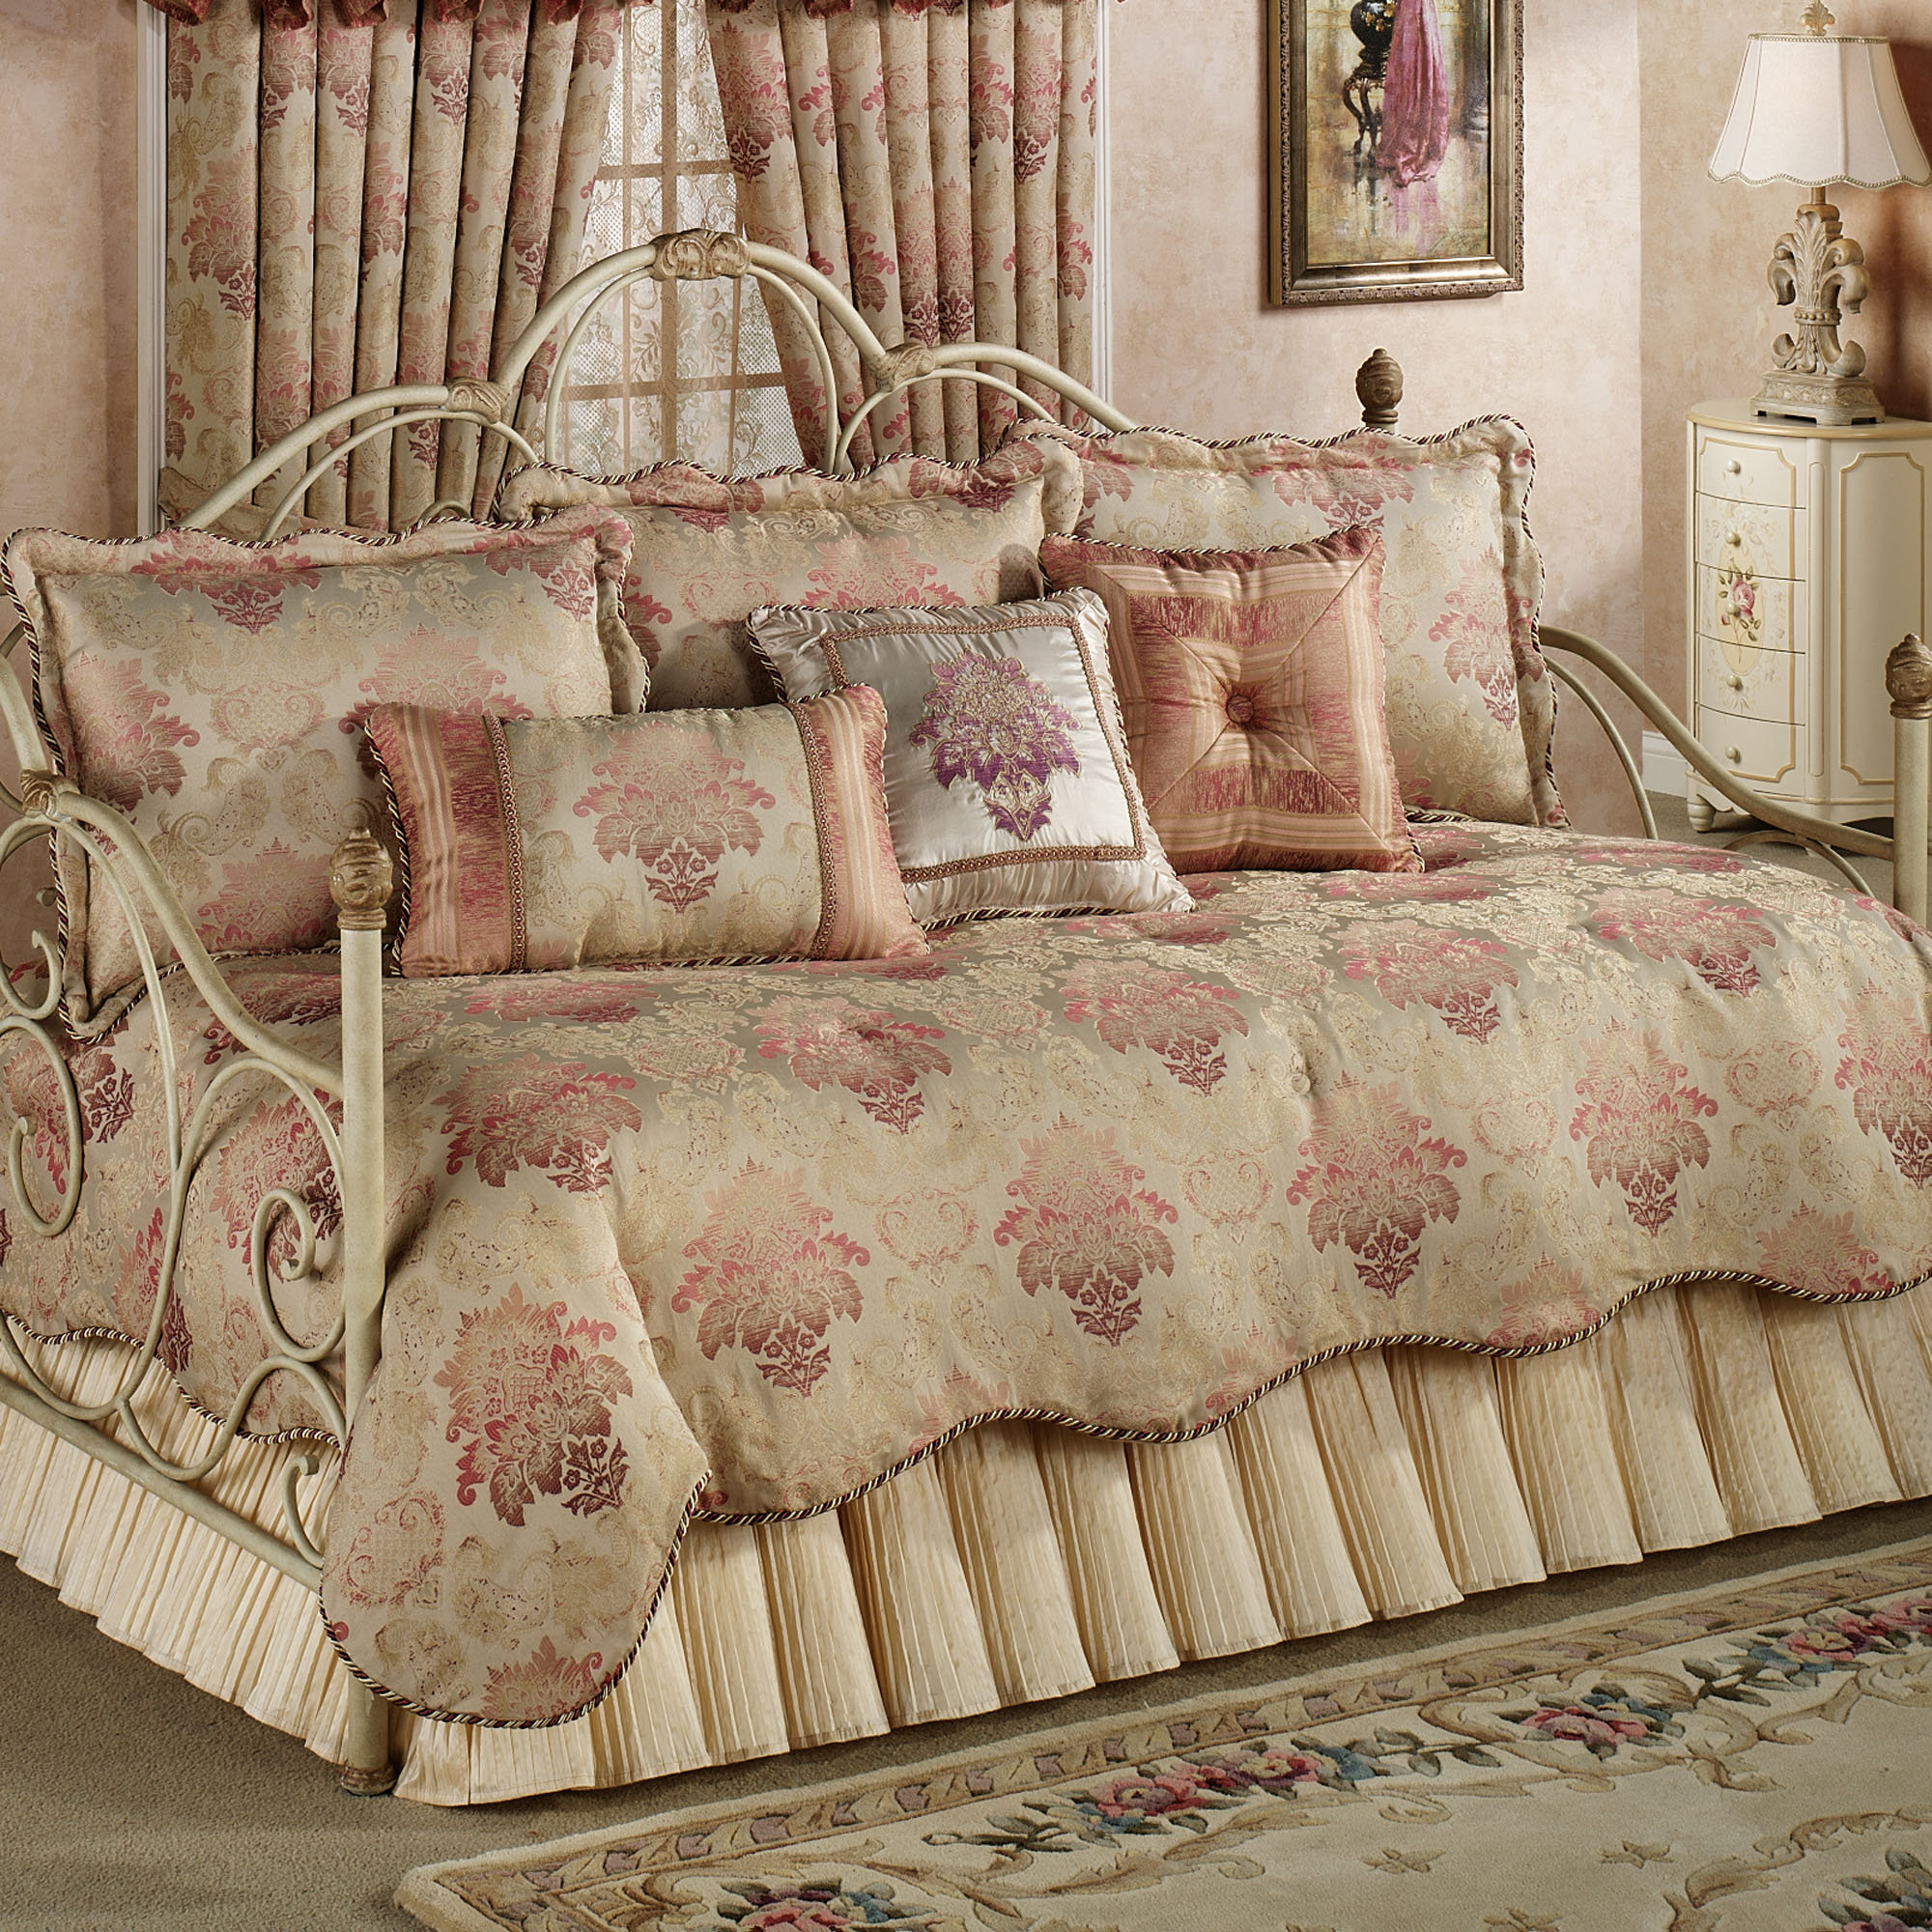 daybed bedding sets clearance photo - 1